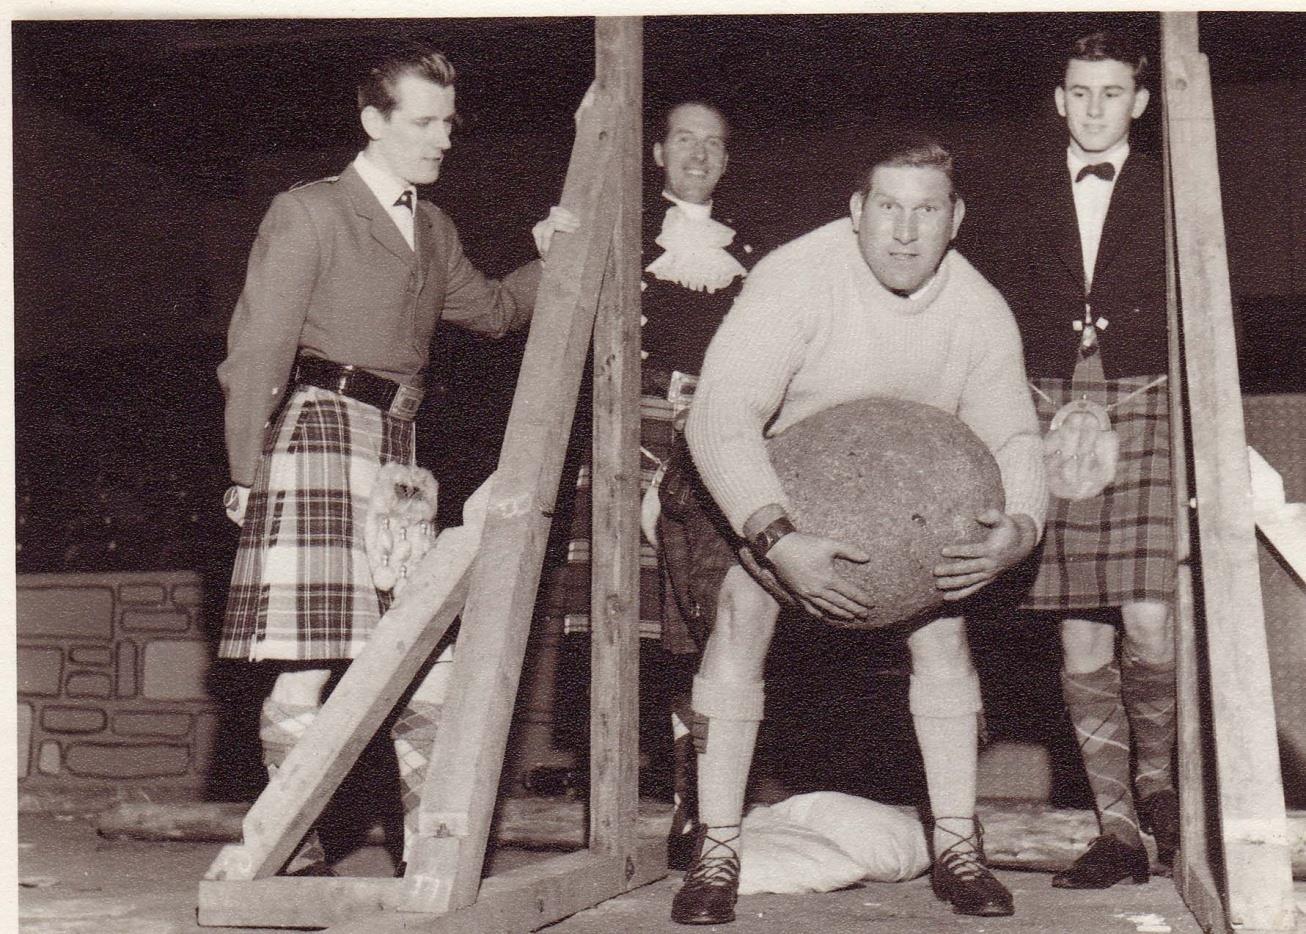 A man lifts the Inver Stone in a competition in Glasgow